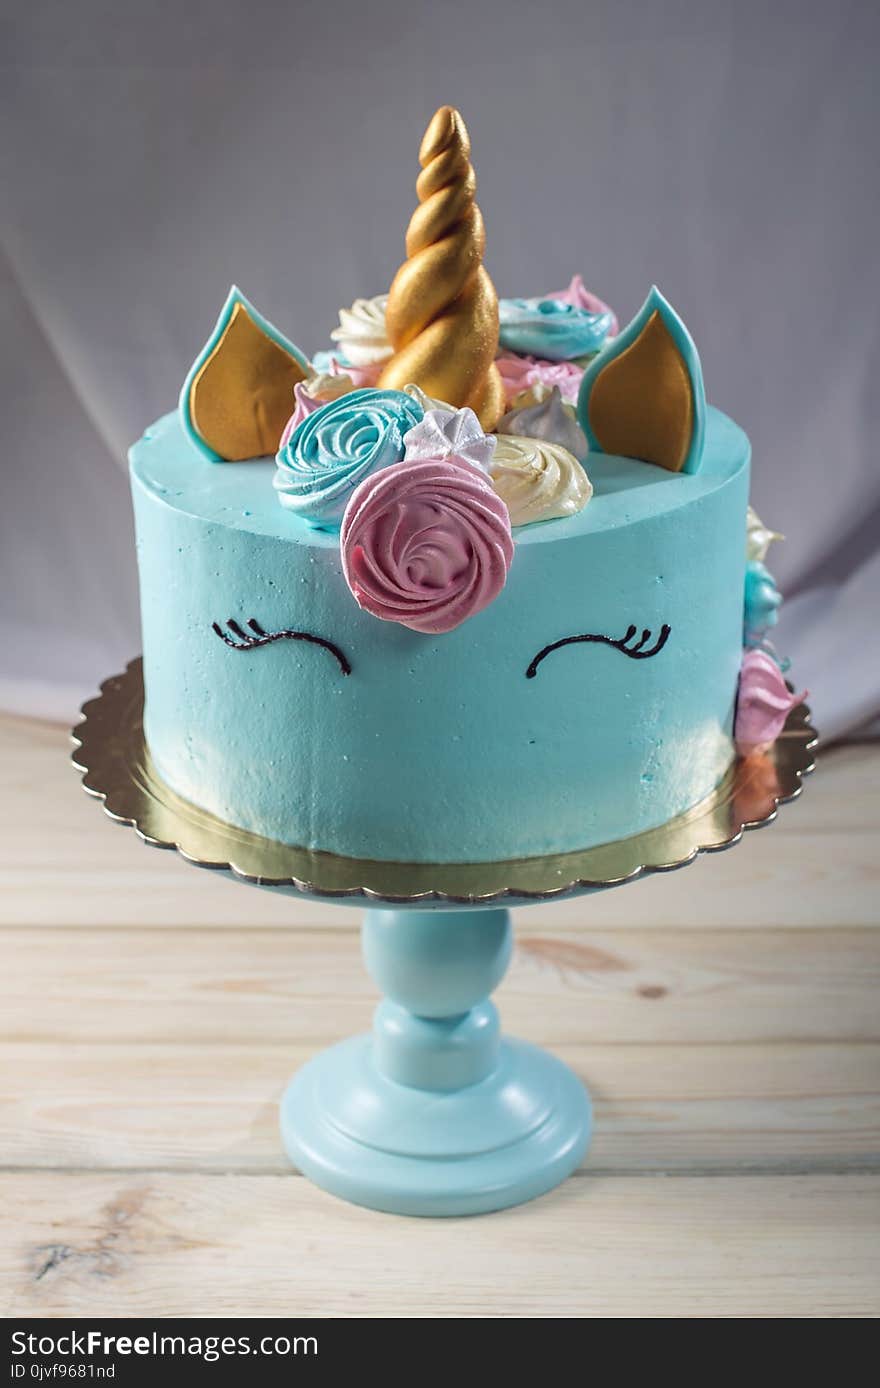 A beautiful bright cake decorated in the form of fantasy unicorn in the blue bookcase. The concept of a festive dessert for kids birthday. A beautiful bright cake decorated in the form of fantasy unicorn in the blue bookcase. The concept of a festive dessert for kids birthday